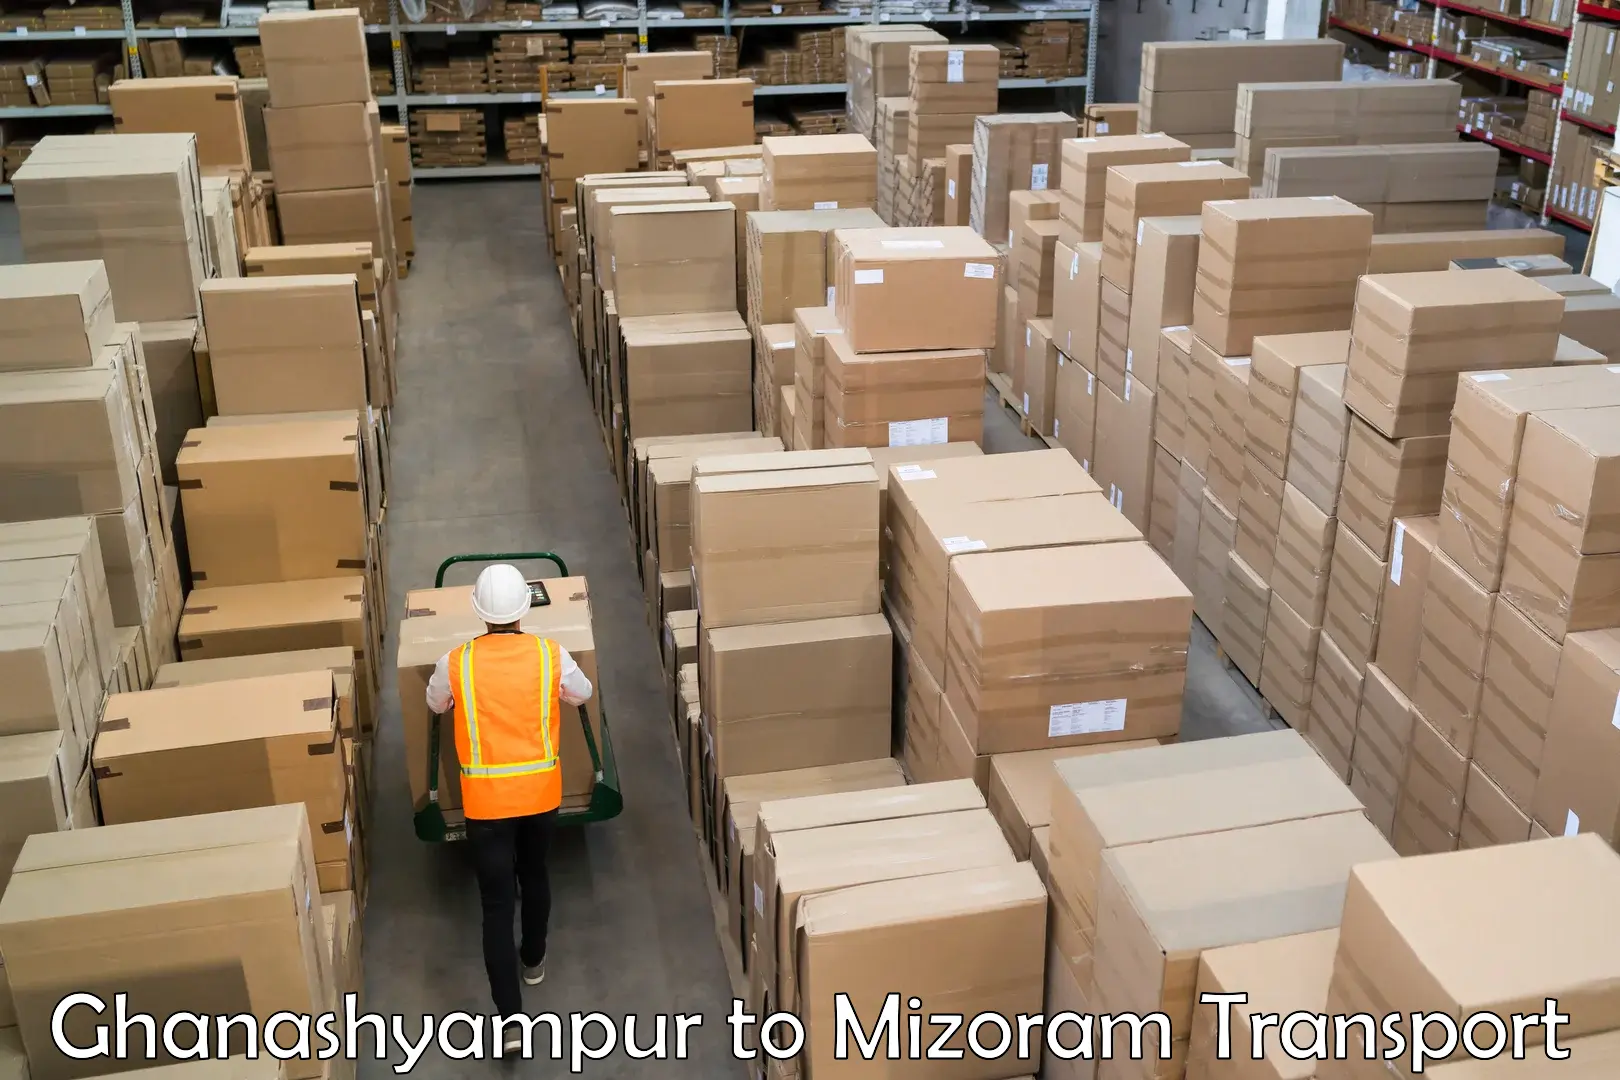 Vehicle transport services in Ghanashyampur to Mizoram